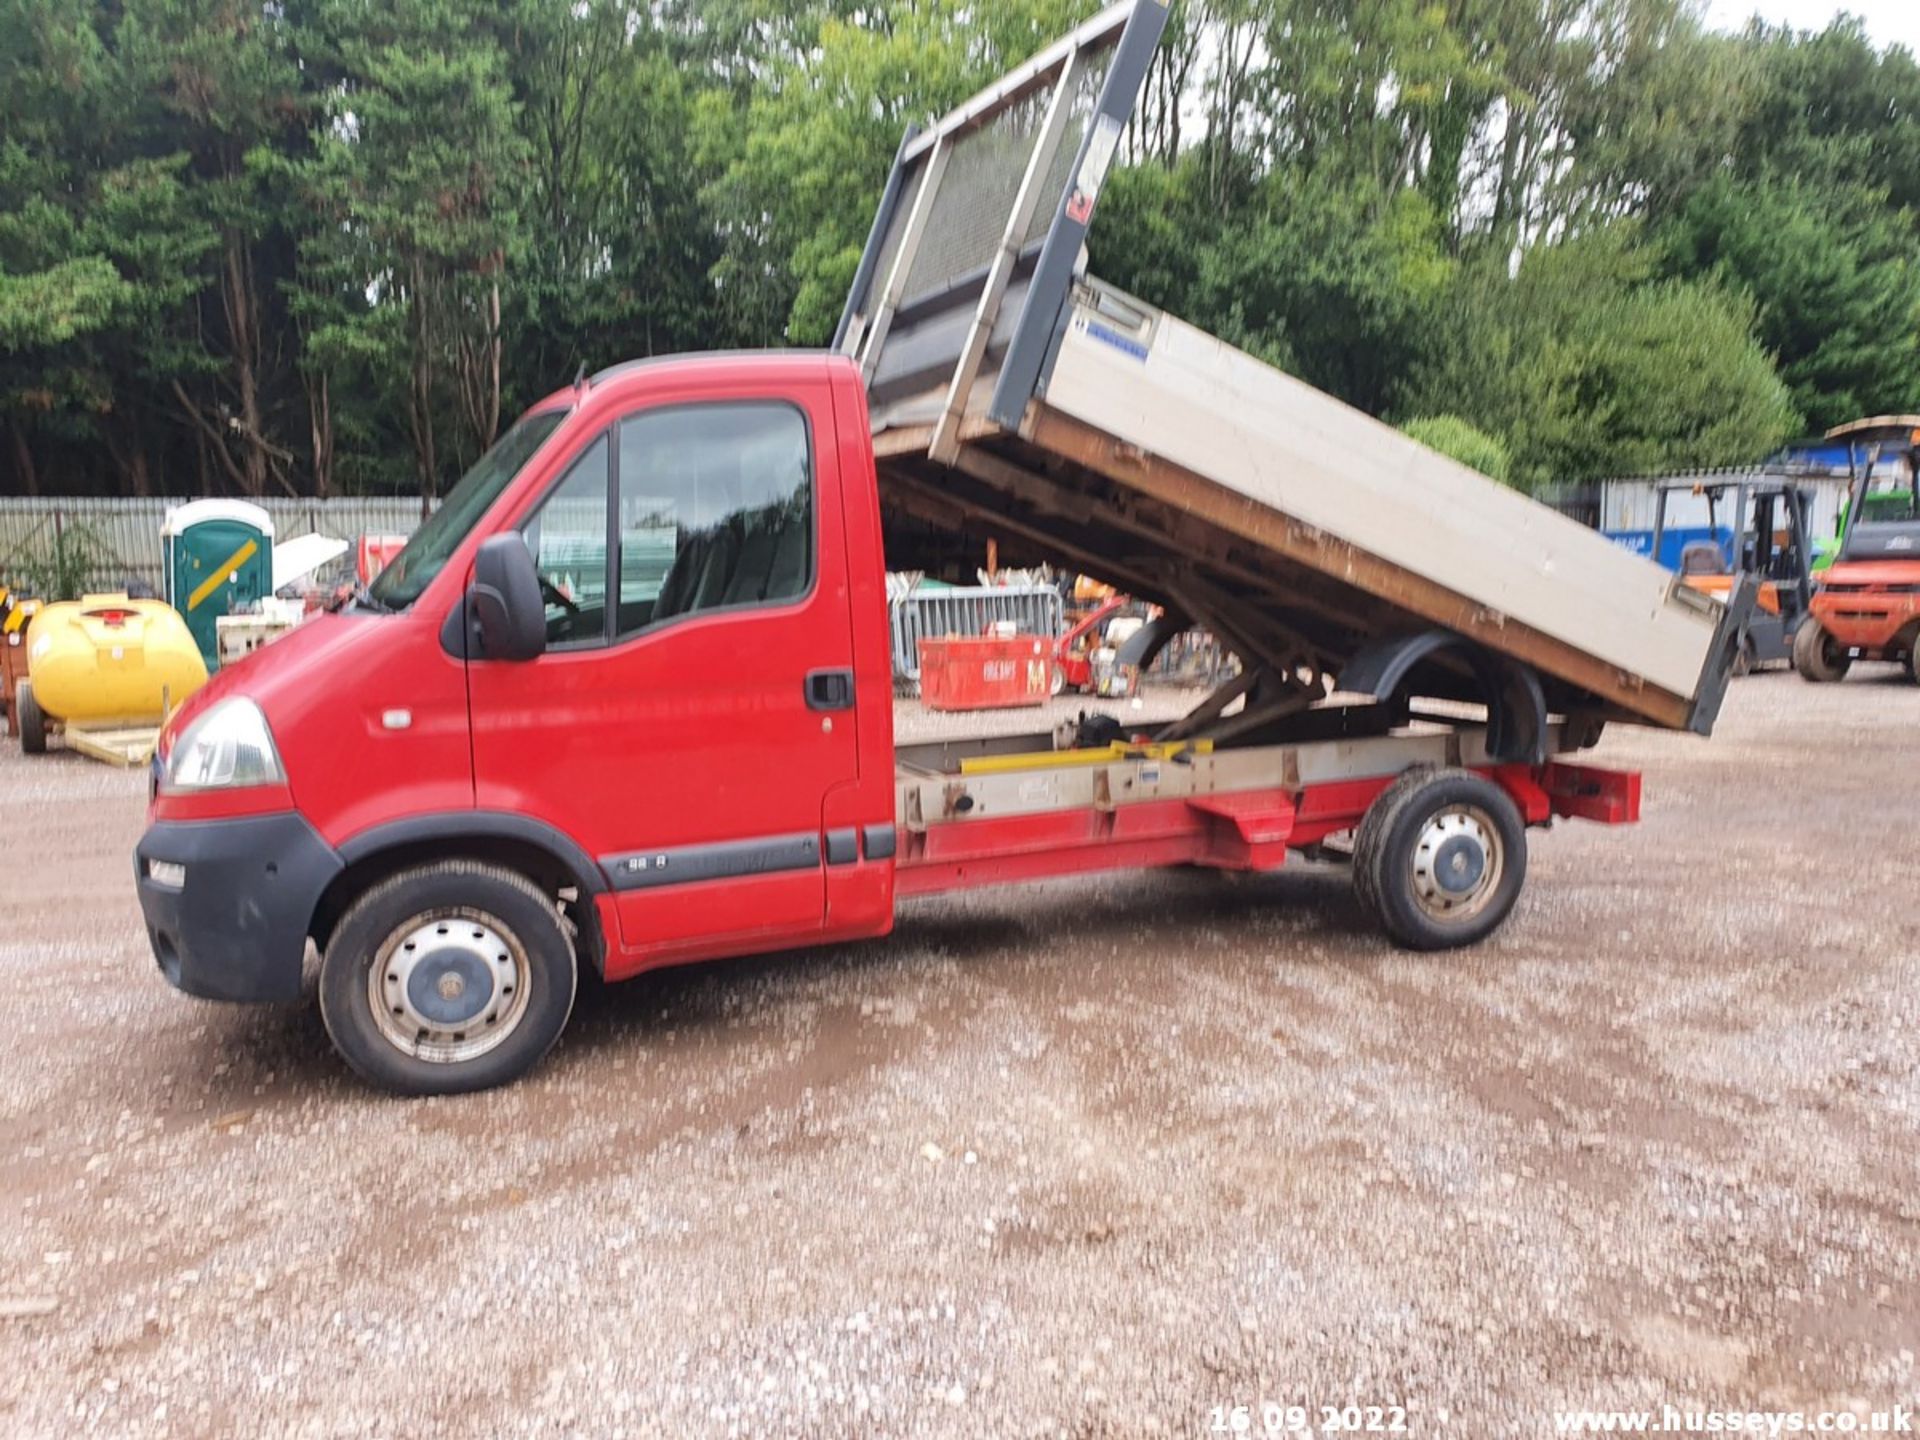 11/11 VAUXHALL MOVANO 3500 CDTI MWB - 2464cc 2dr Tipper (Red, 52k) - Image 41 of 44